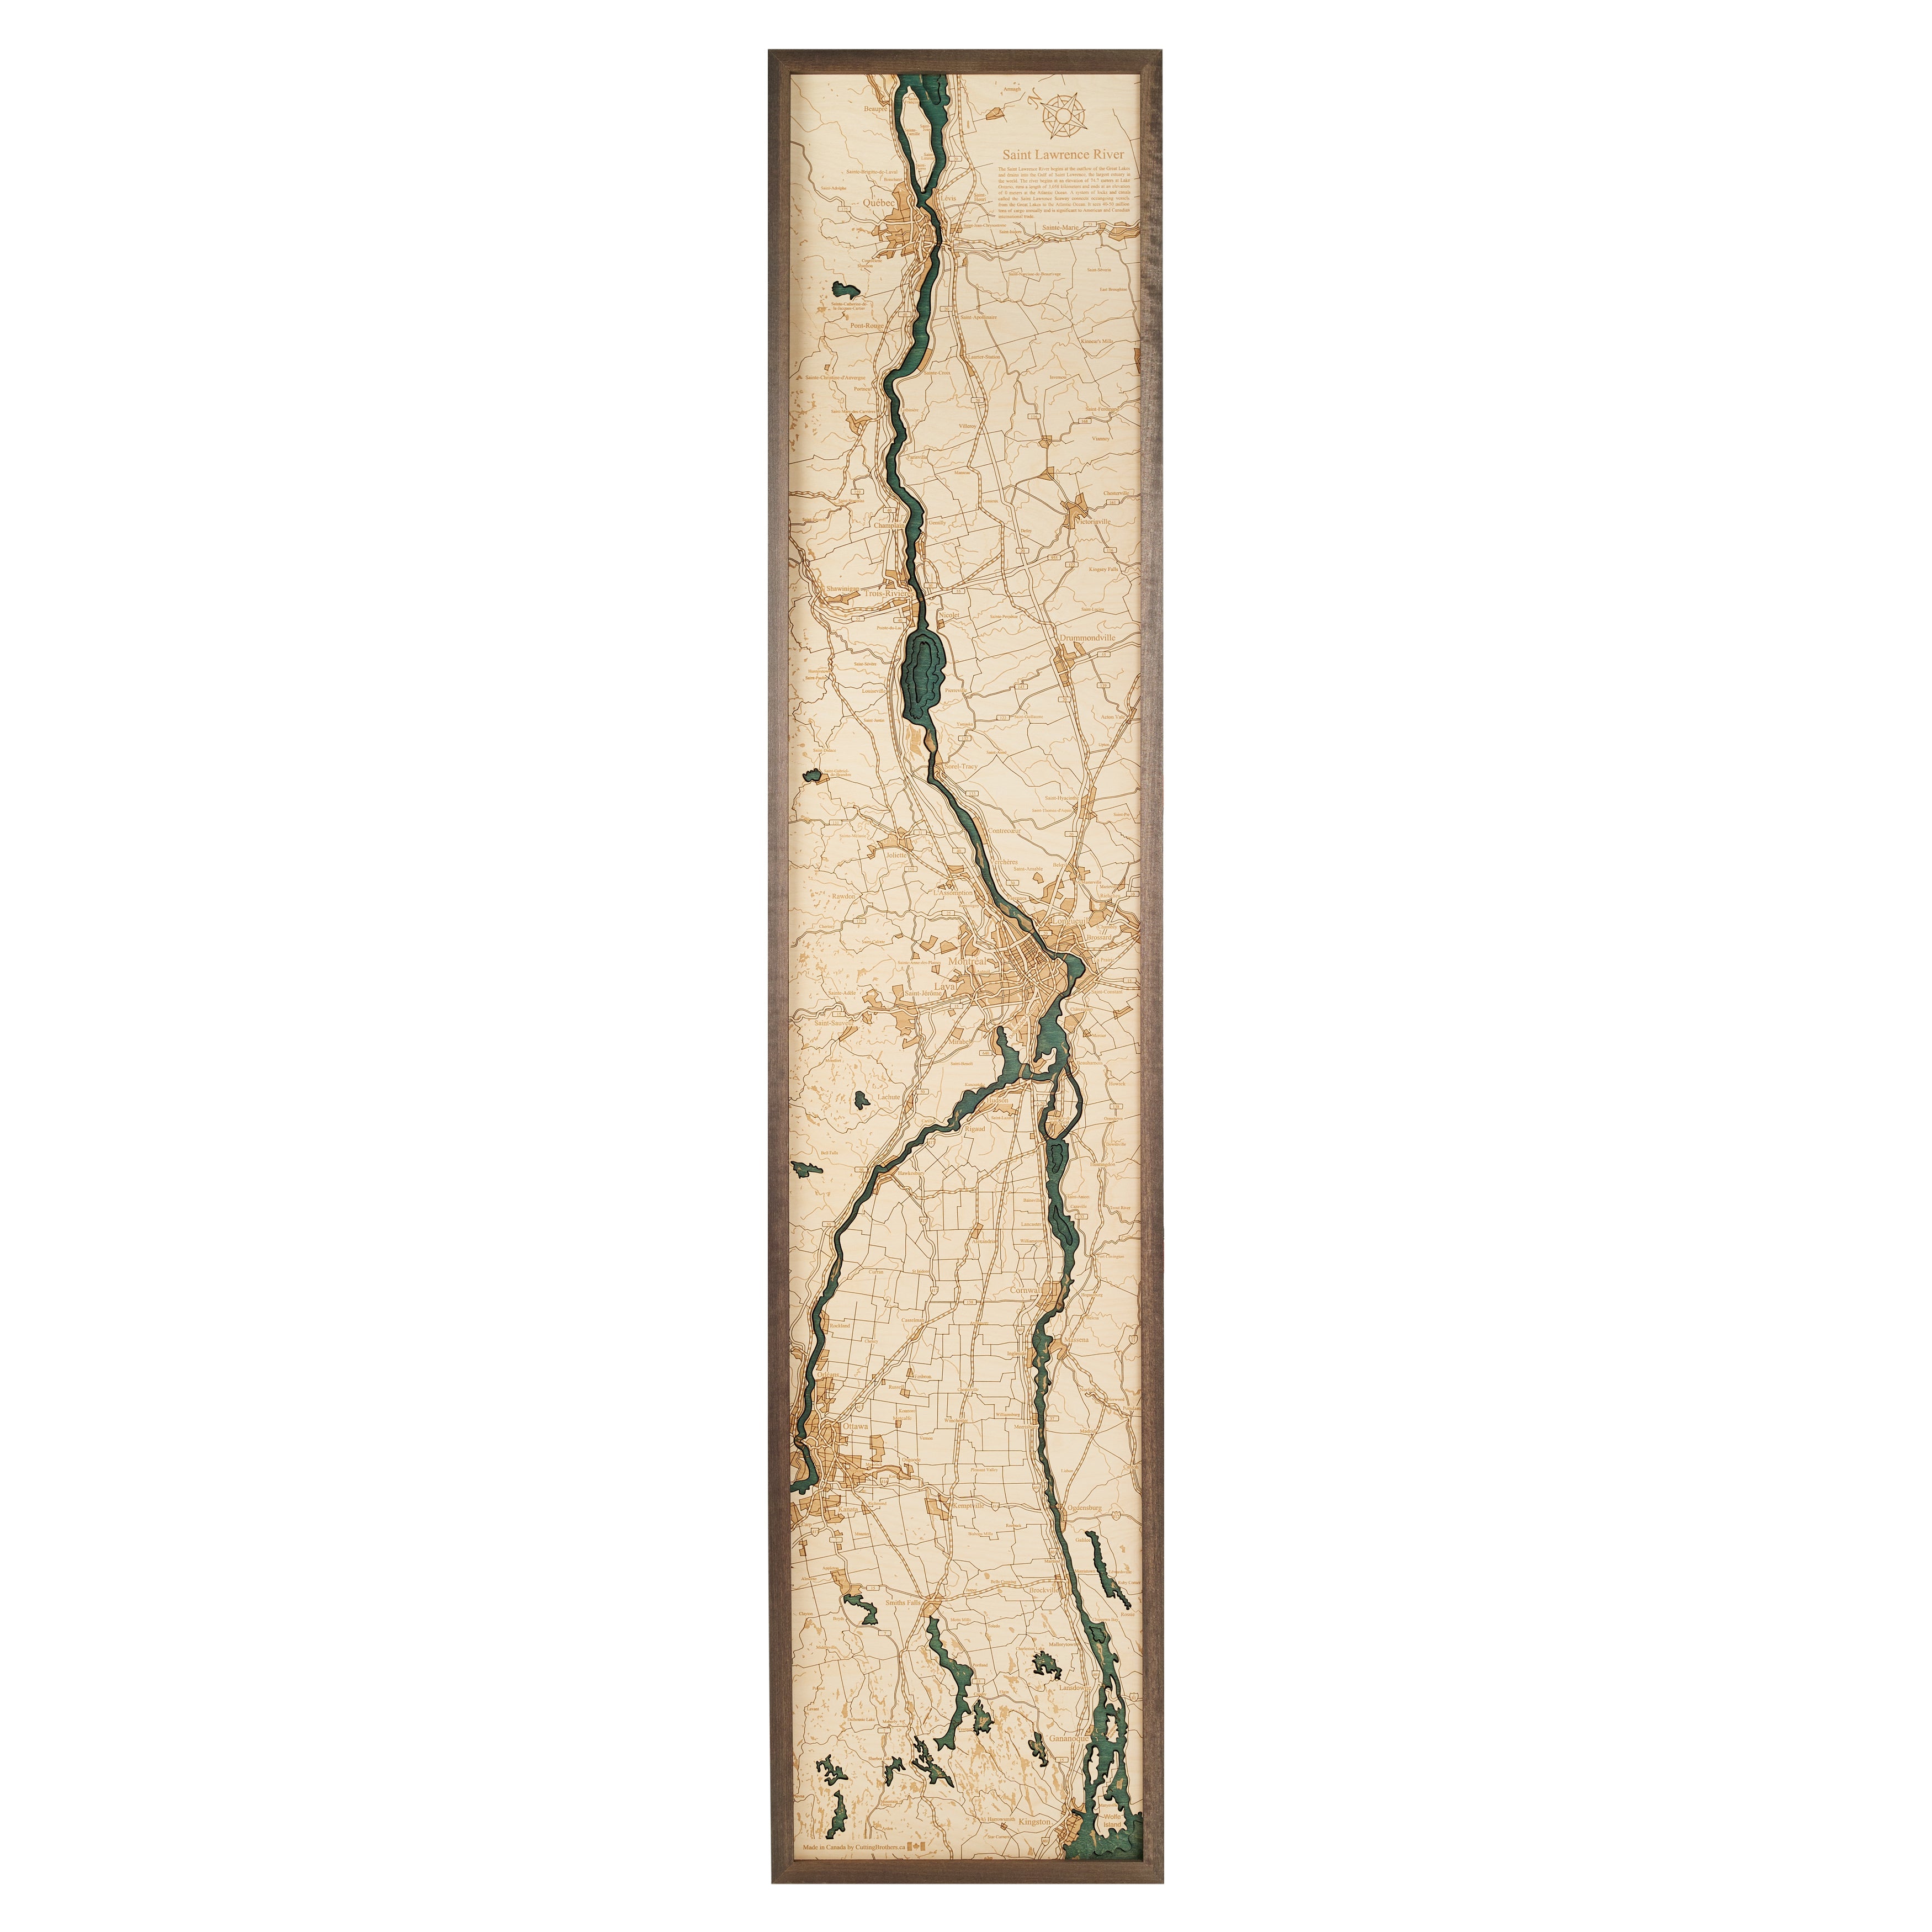 ST. LAWRENCE RIVER 3D WOODEN WALL MAP - Version XL